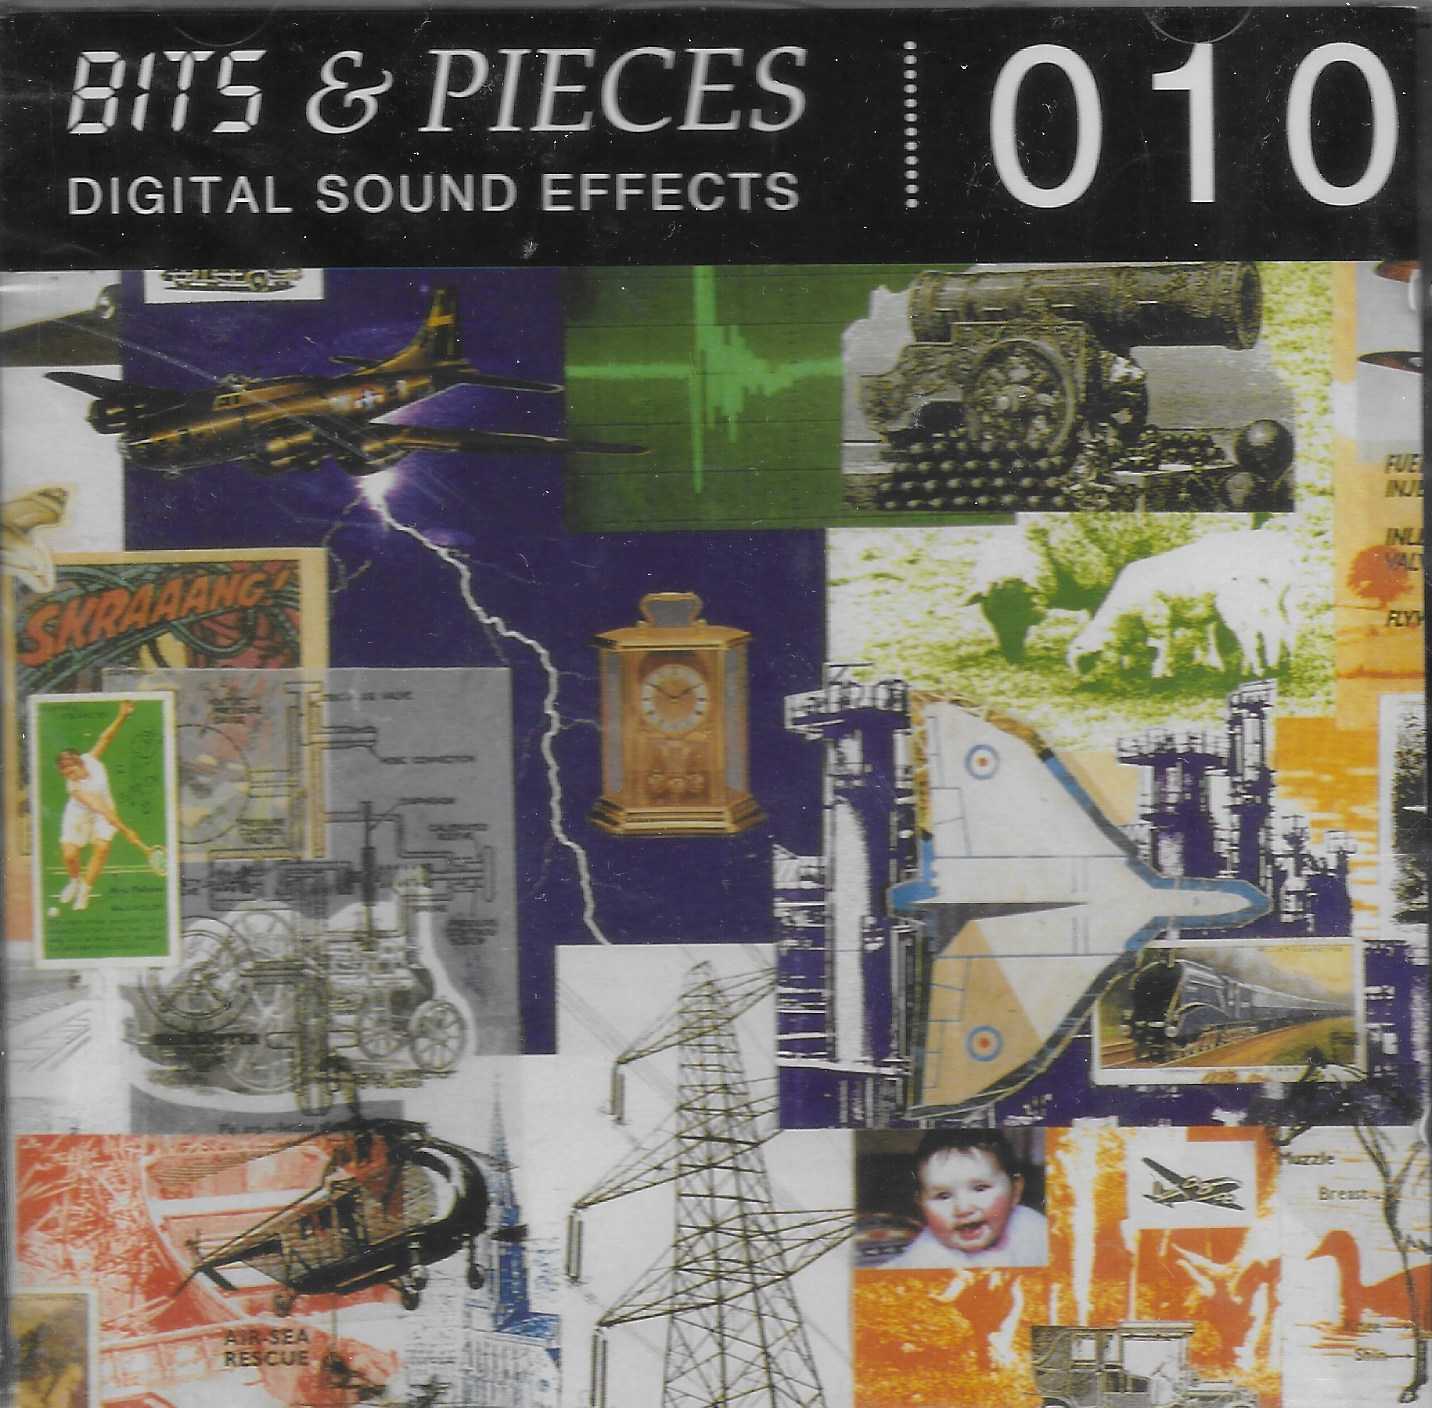 Picture of BITS 010 Bits & pieces digital sound effects 010 by artist Various from ITV, Channel 4 and Channel 5 library